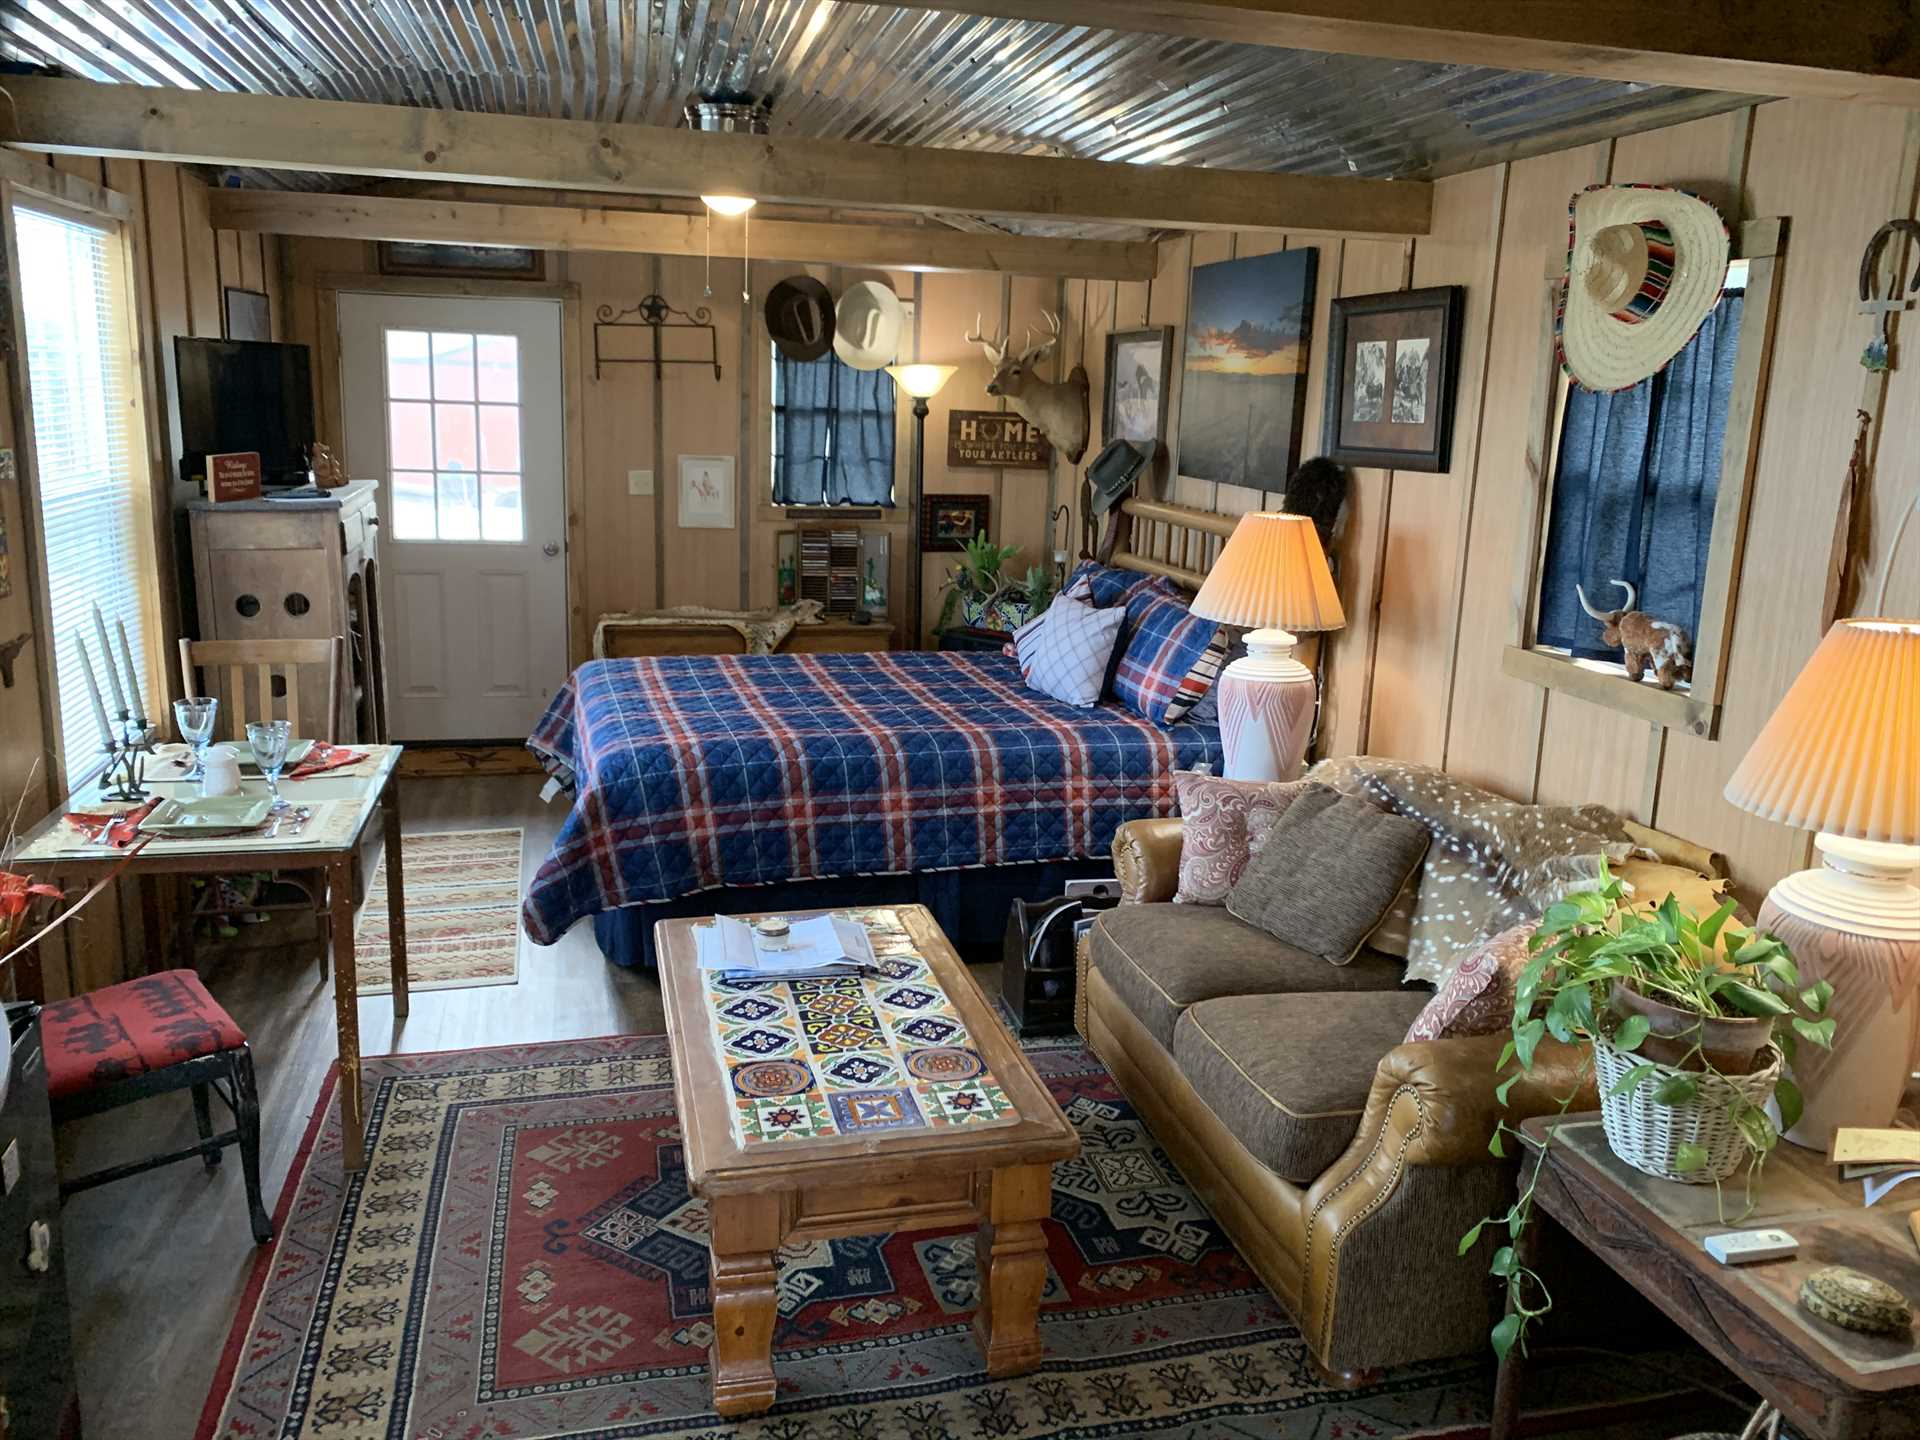                                                 Cozy, eclectic, and flooded with natural light, the cabin sets the stage for an incredible romantic getaway!